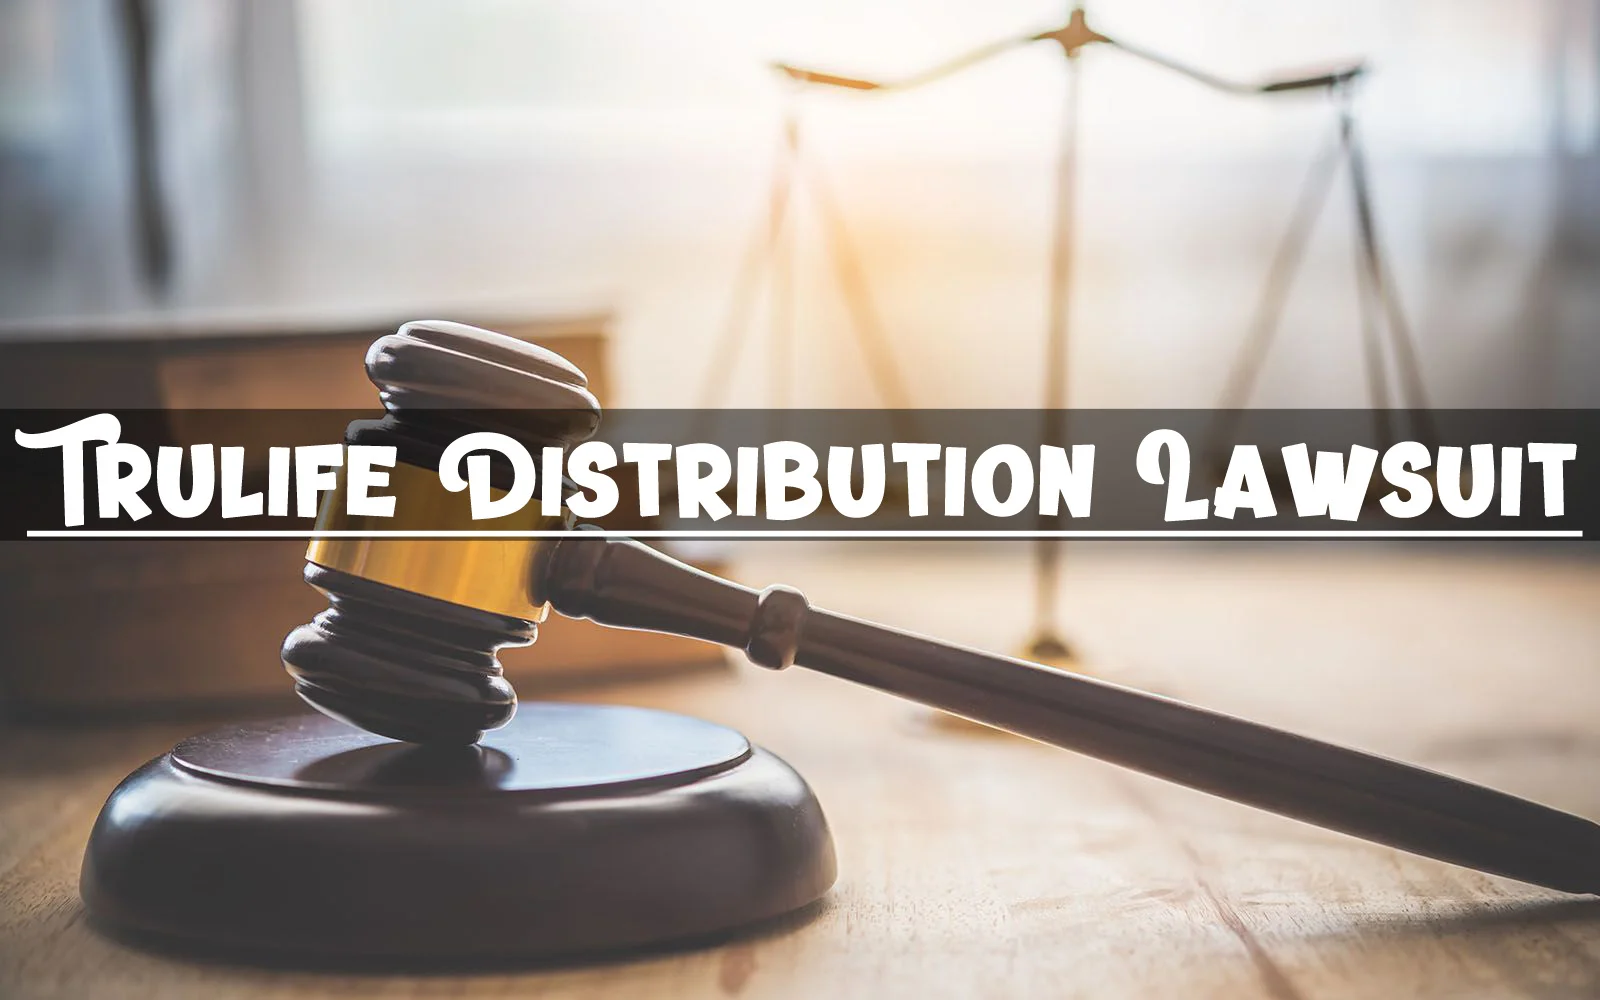 All information about trulife distribution lawsuit